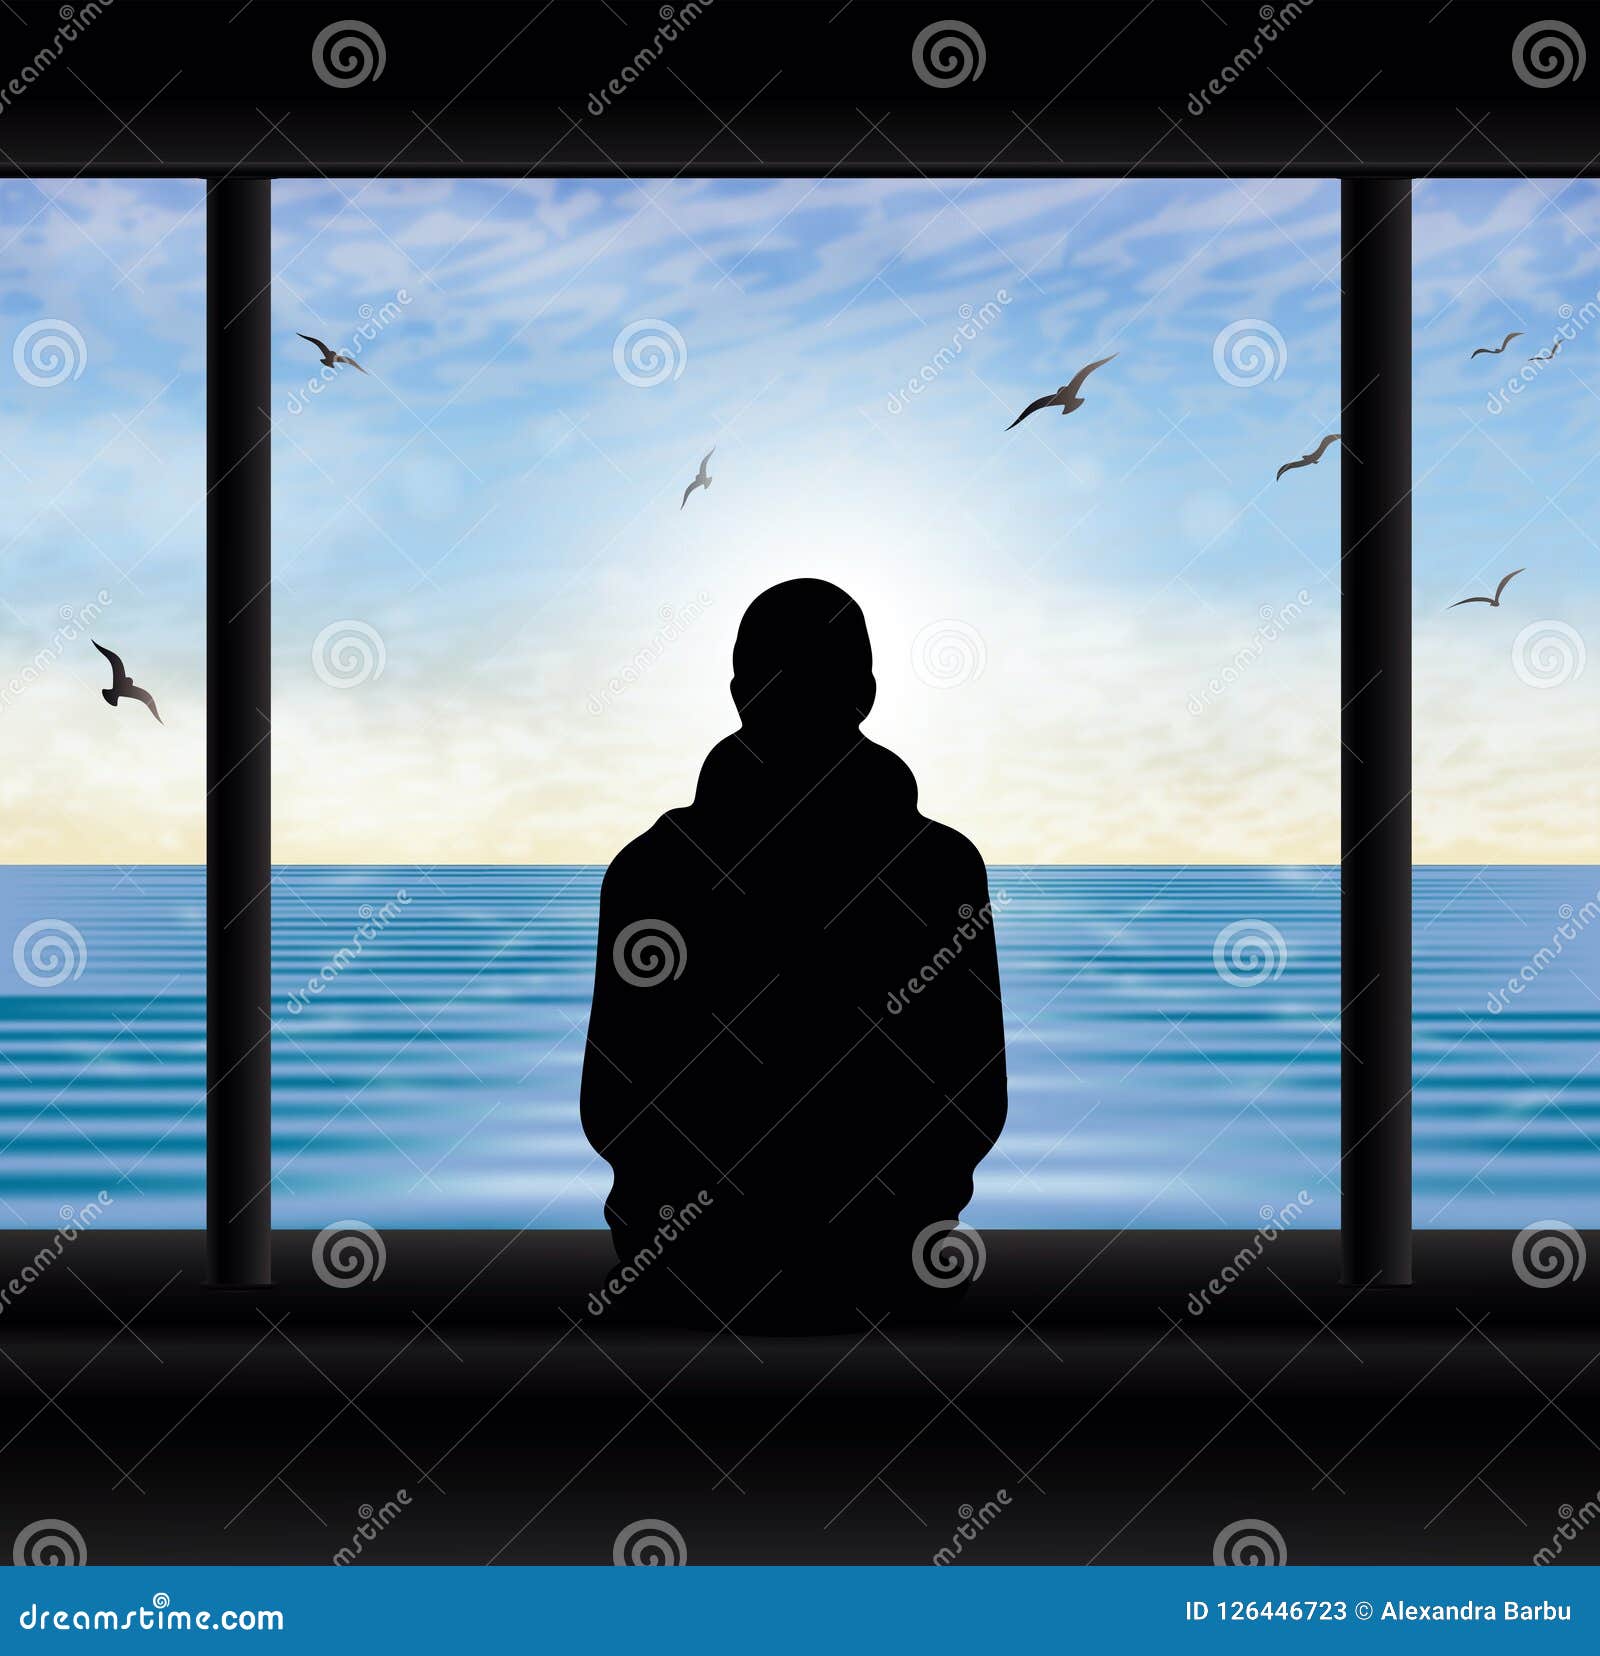 man thinking silhouette at the window looking at lake